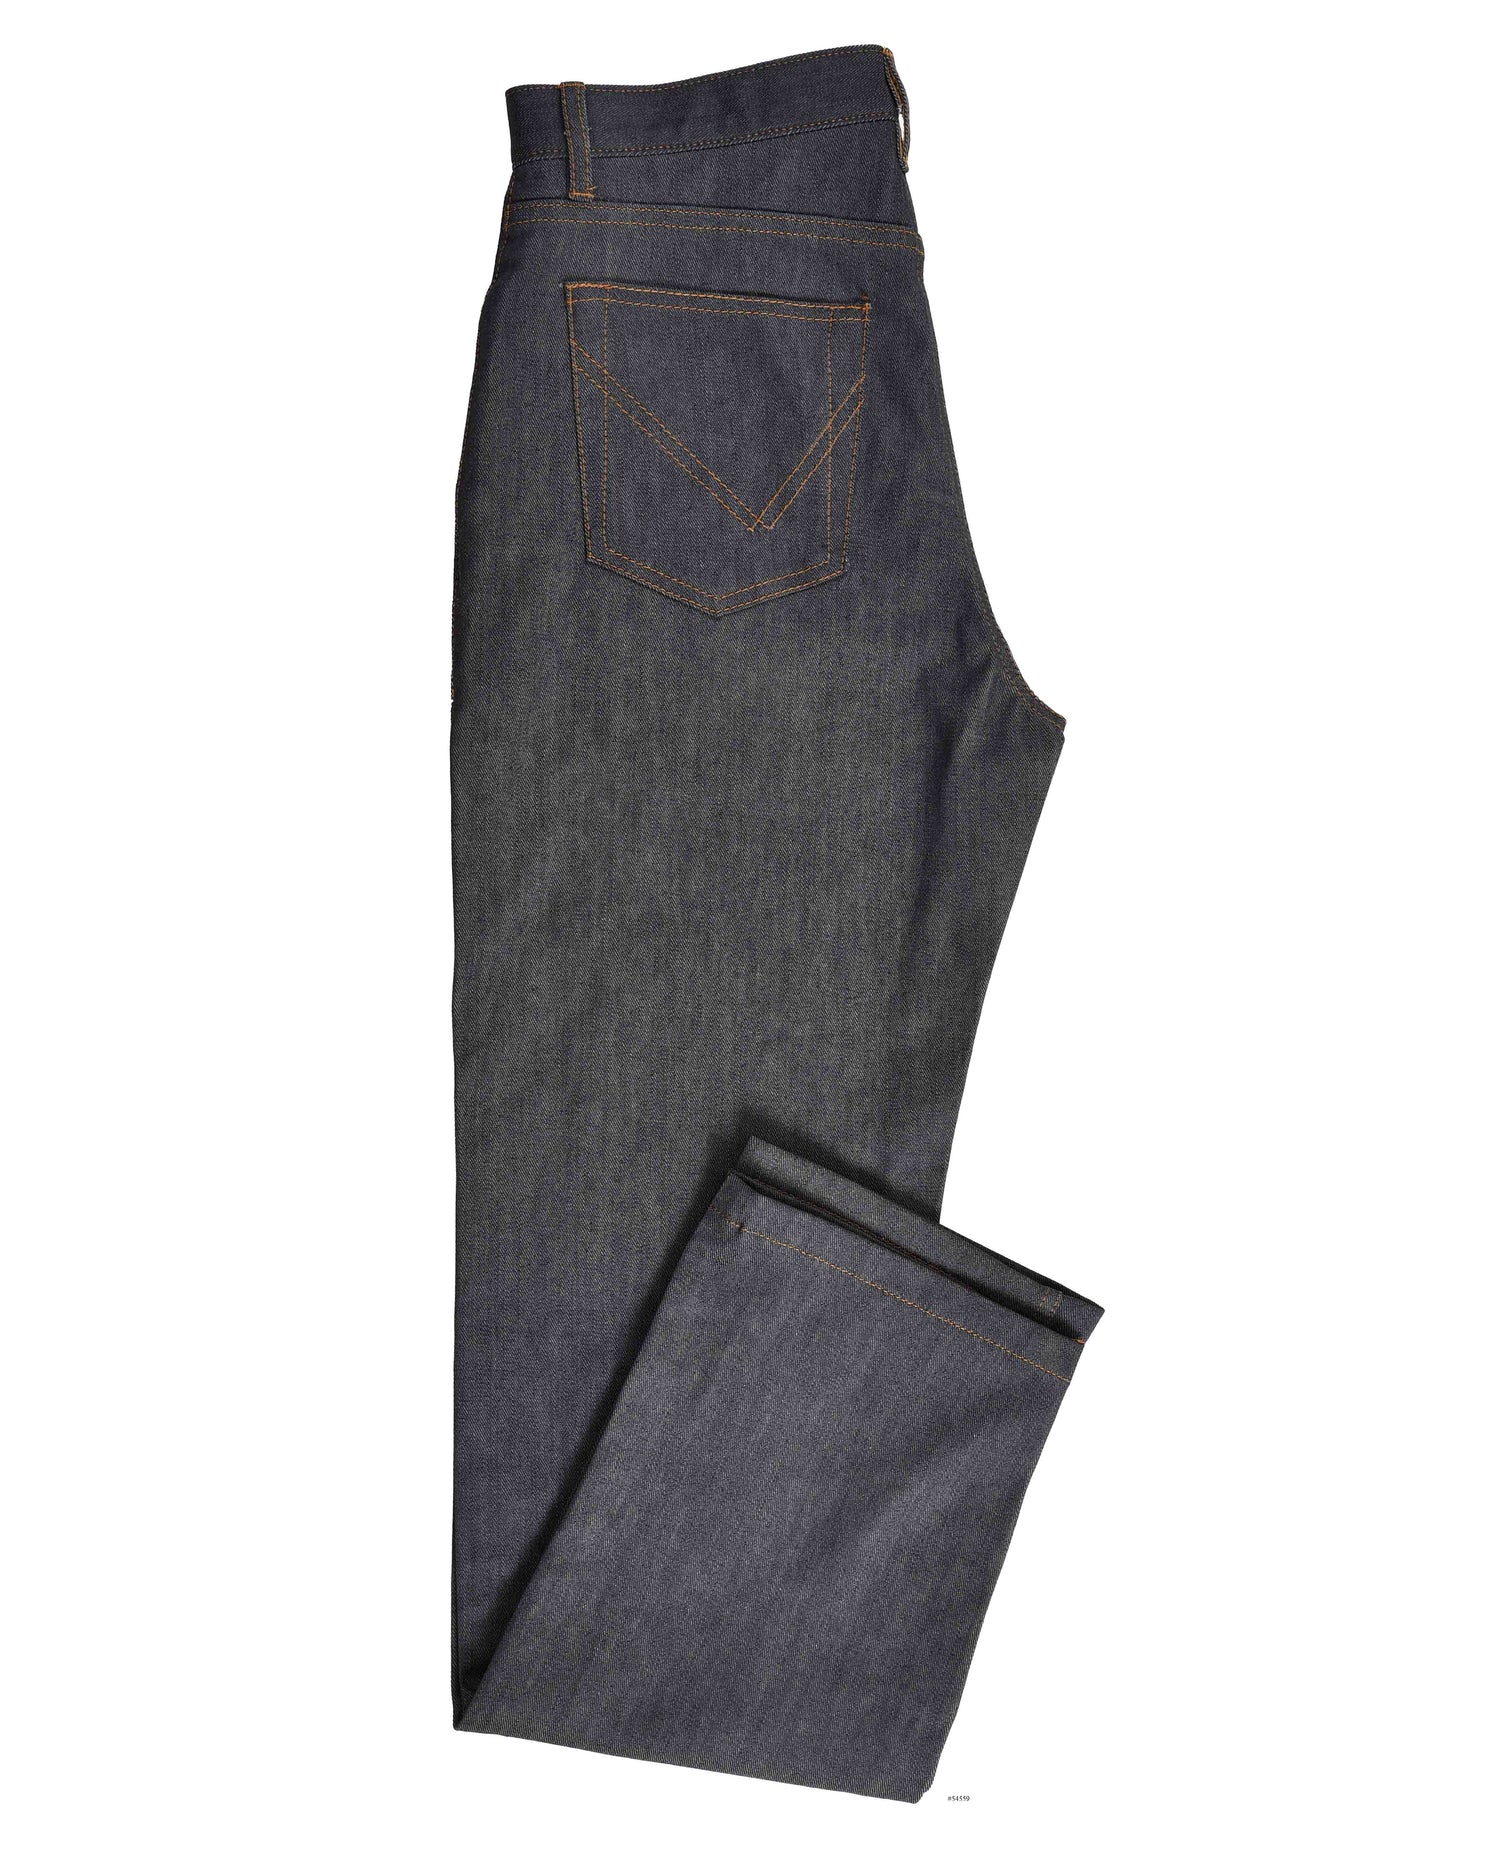 Side view of stretchable jeans for men by Luxire in dark grey